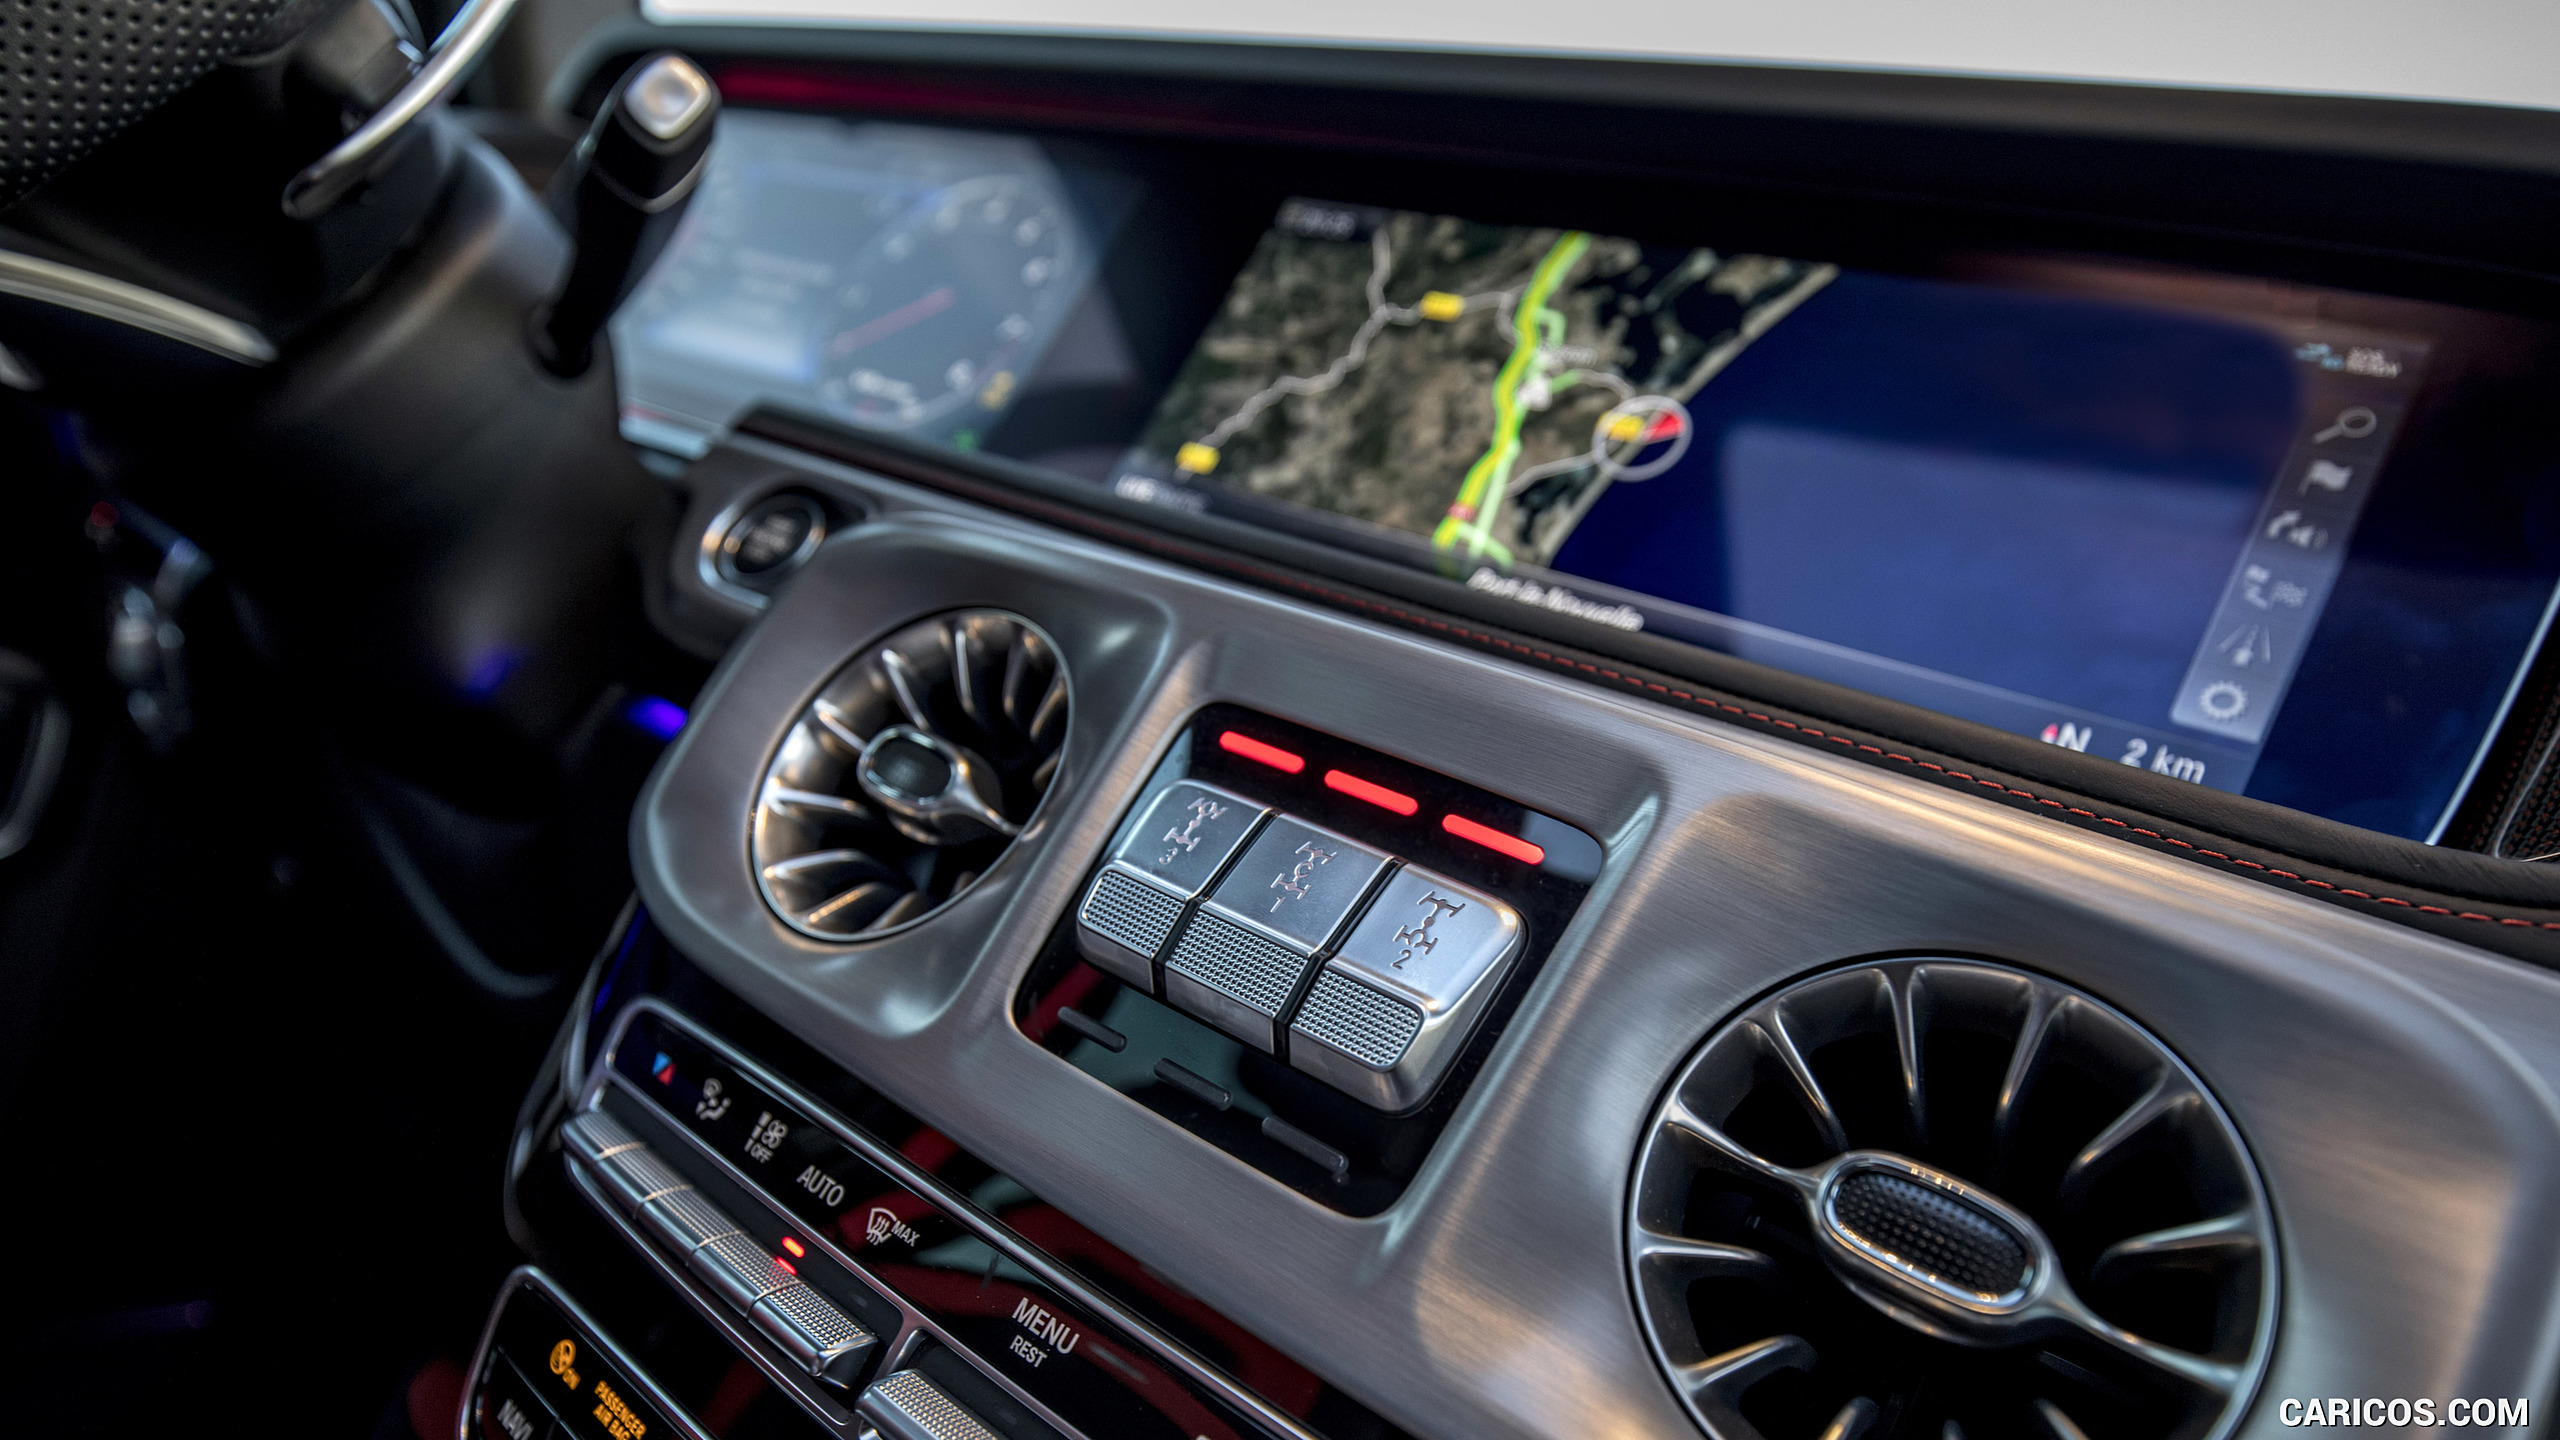 2019 Mercedes-AMG G63 - Central Console, #195 of 452